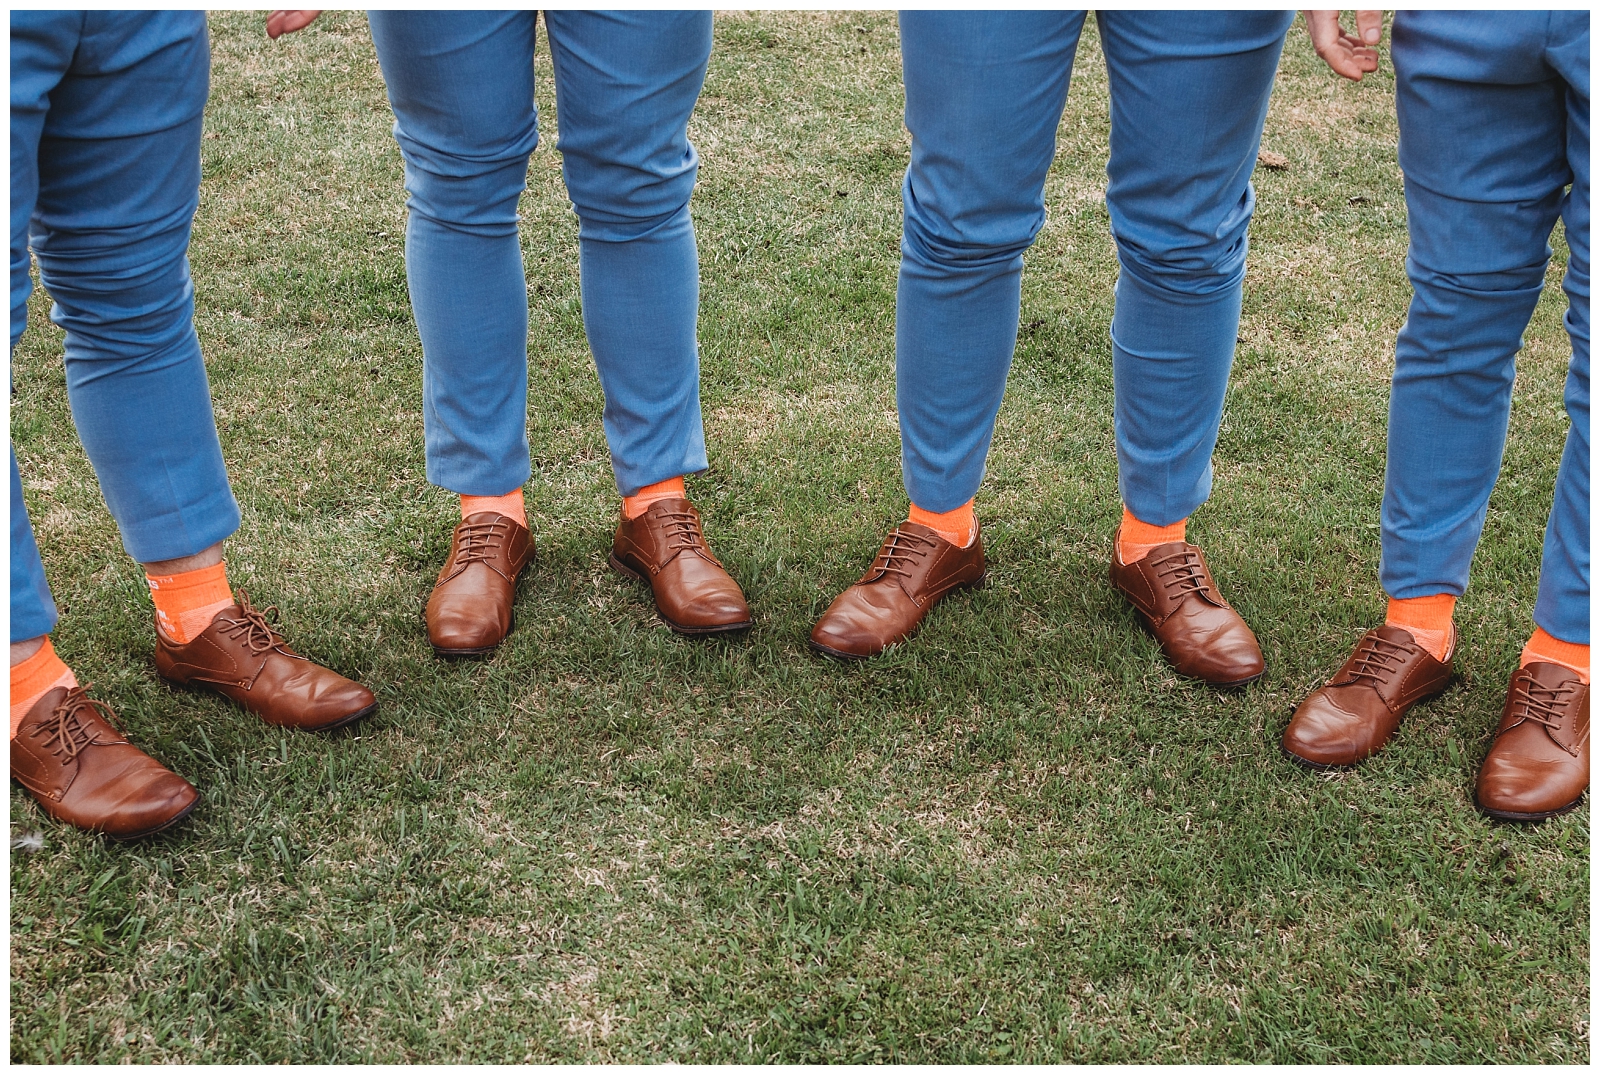 Groomsmen stand in arc shape lifting pant legs to show matching shoes and orange socks.